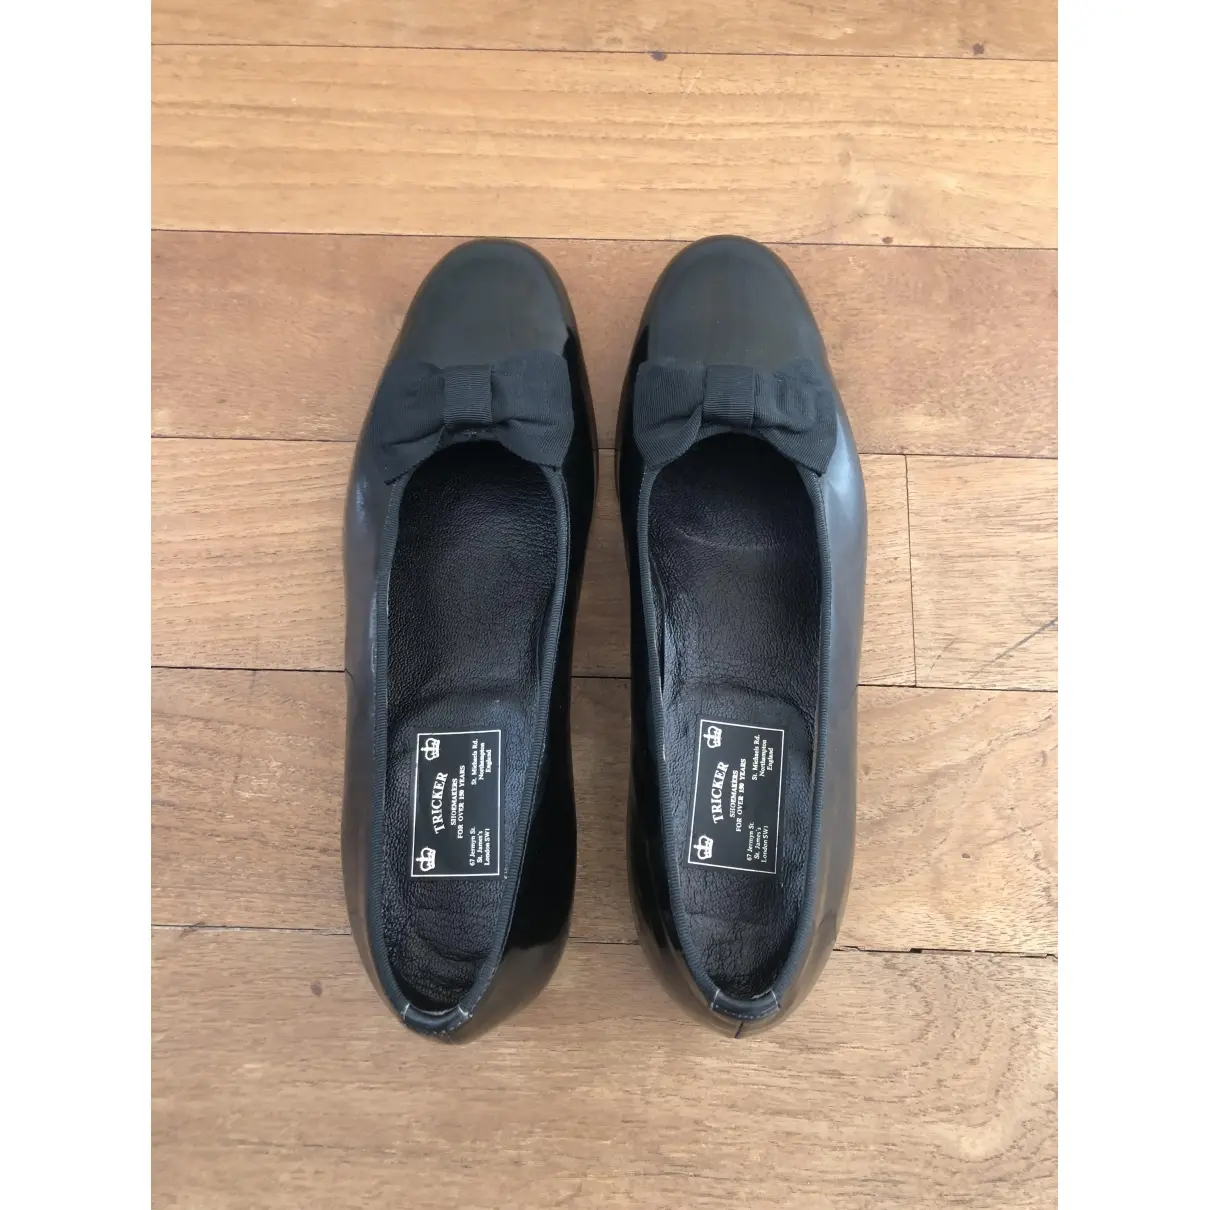 Patent leather flats Trickers London - Vintage